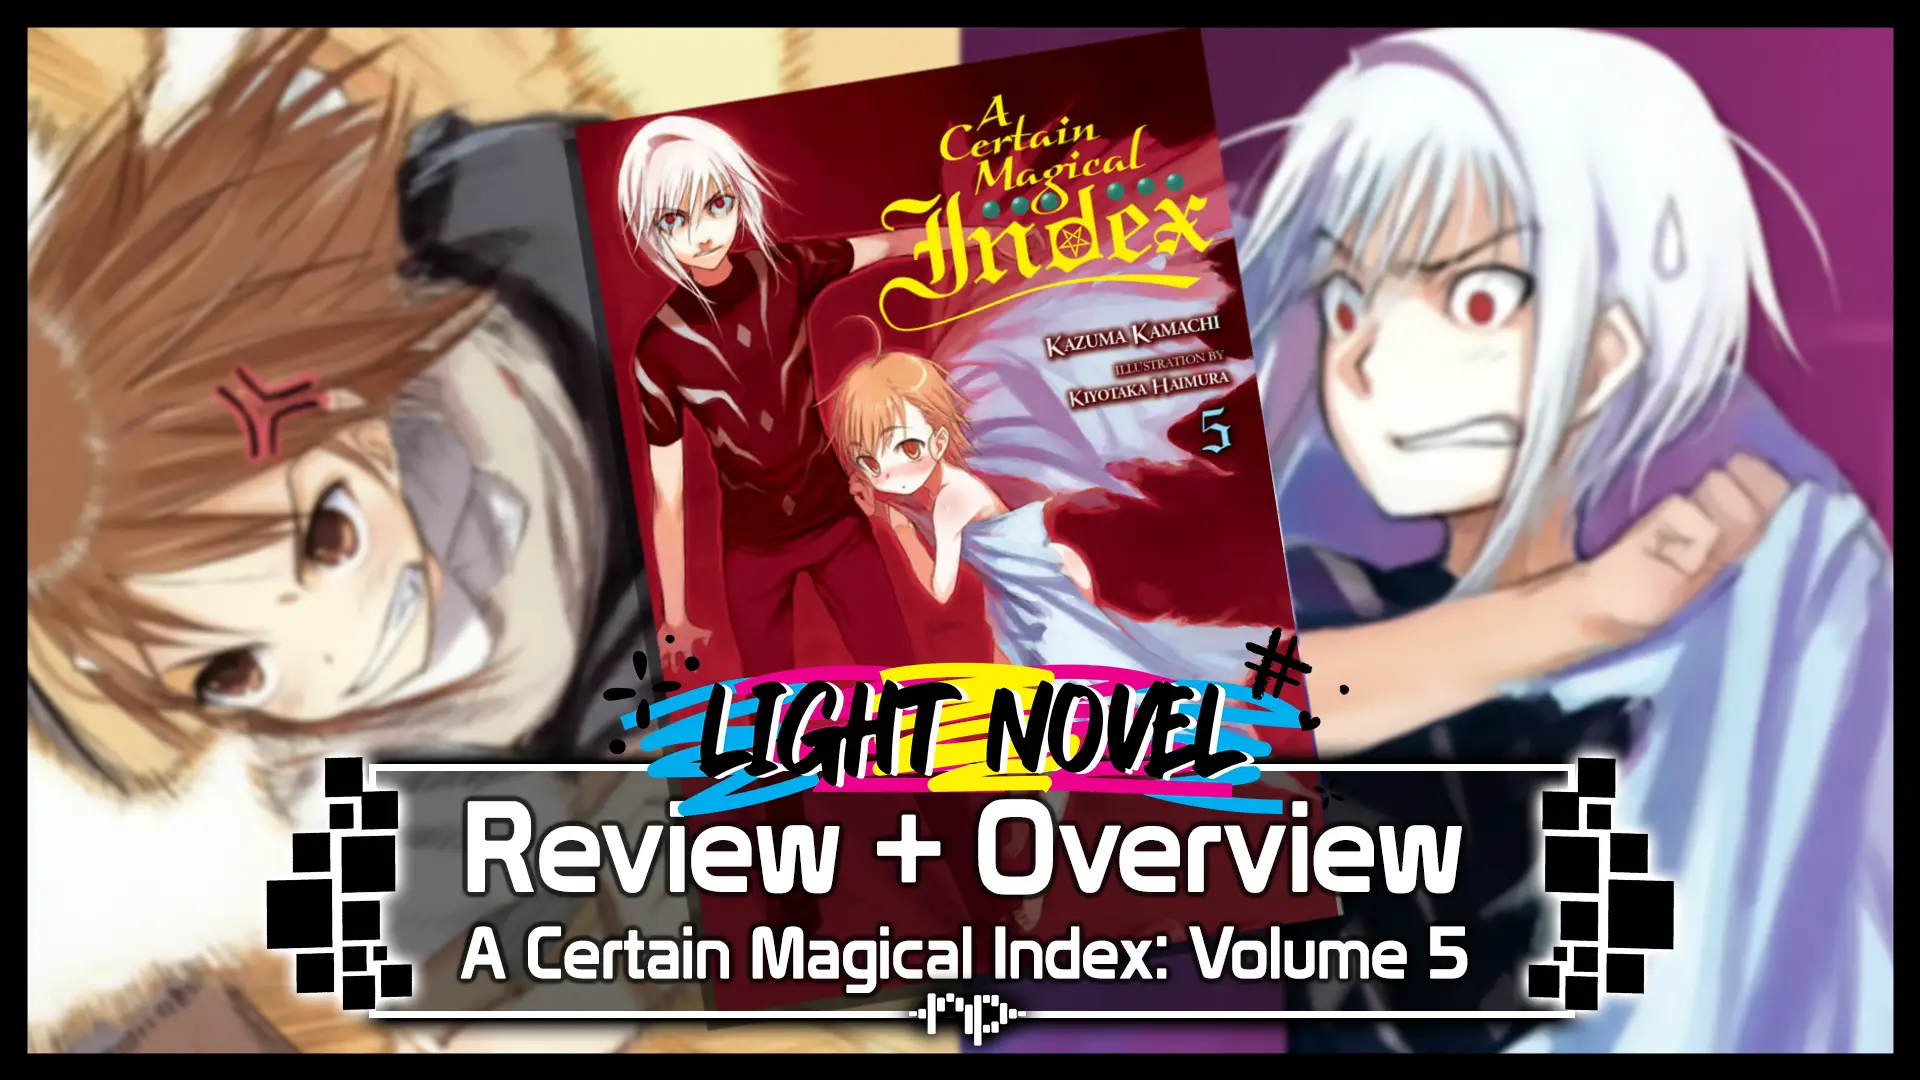 A Certain Magical Index Vol. 5 Review + Overview — Three Stories Arc — New Love, Redemption & Summer Break’s End